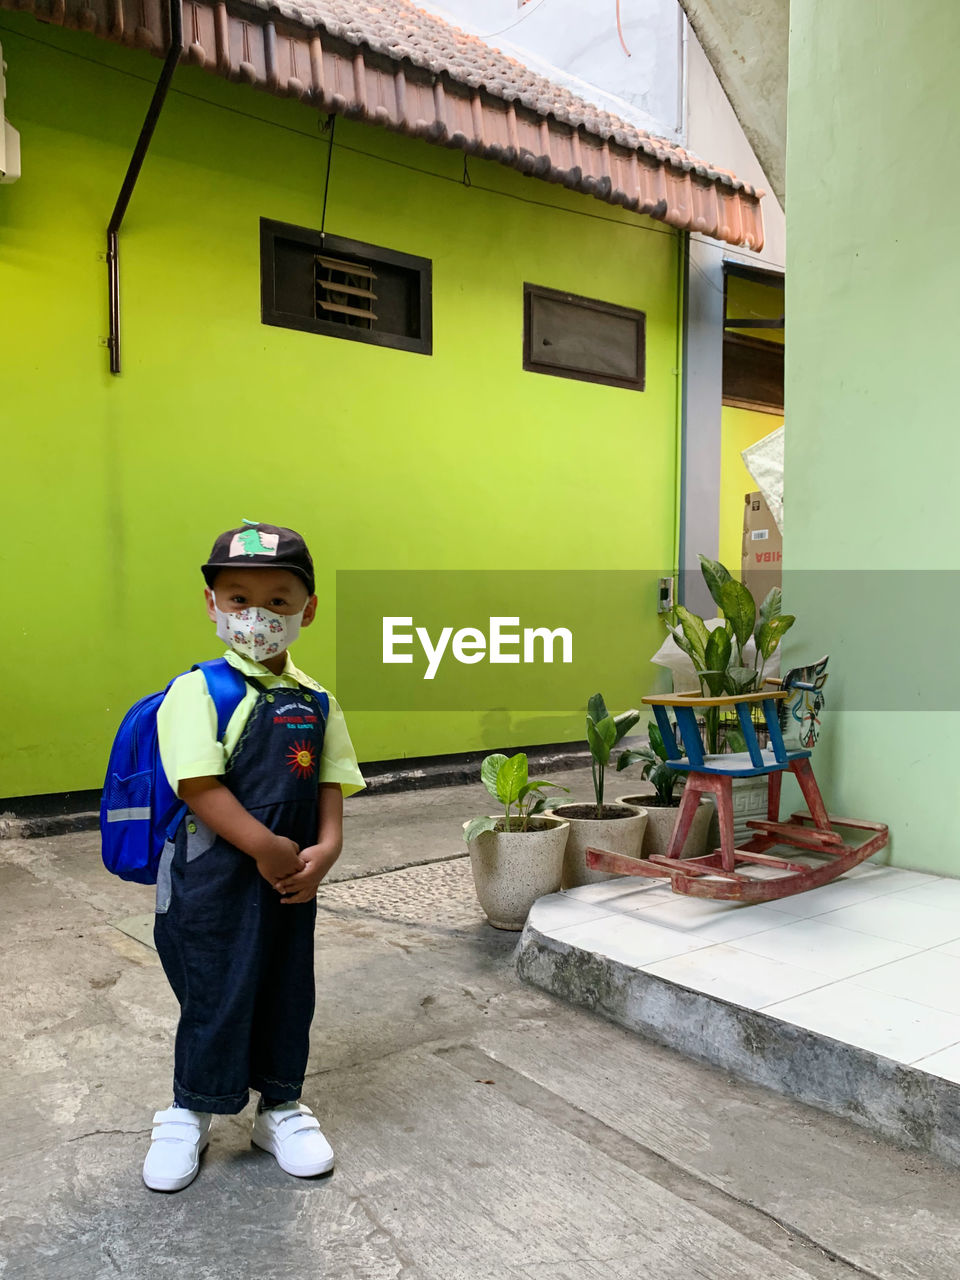 Kids first time school and always use mask safe him